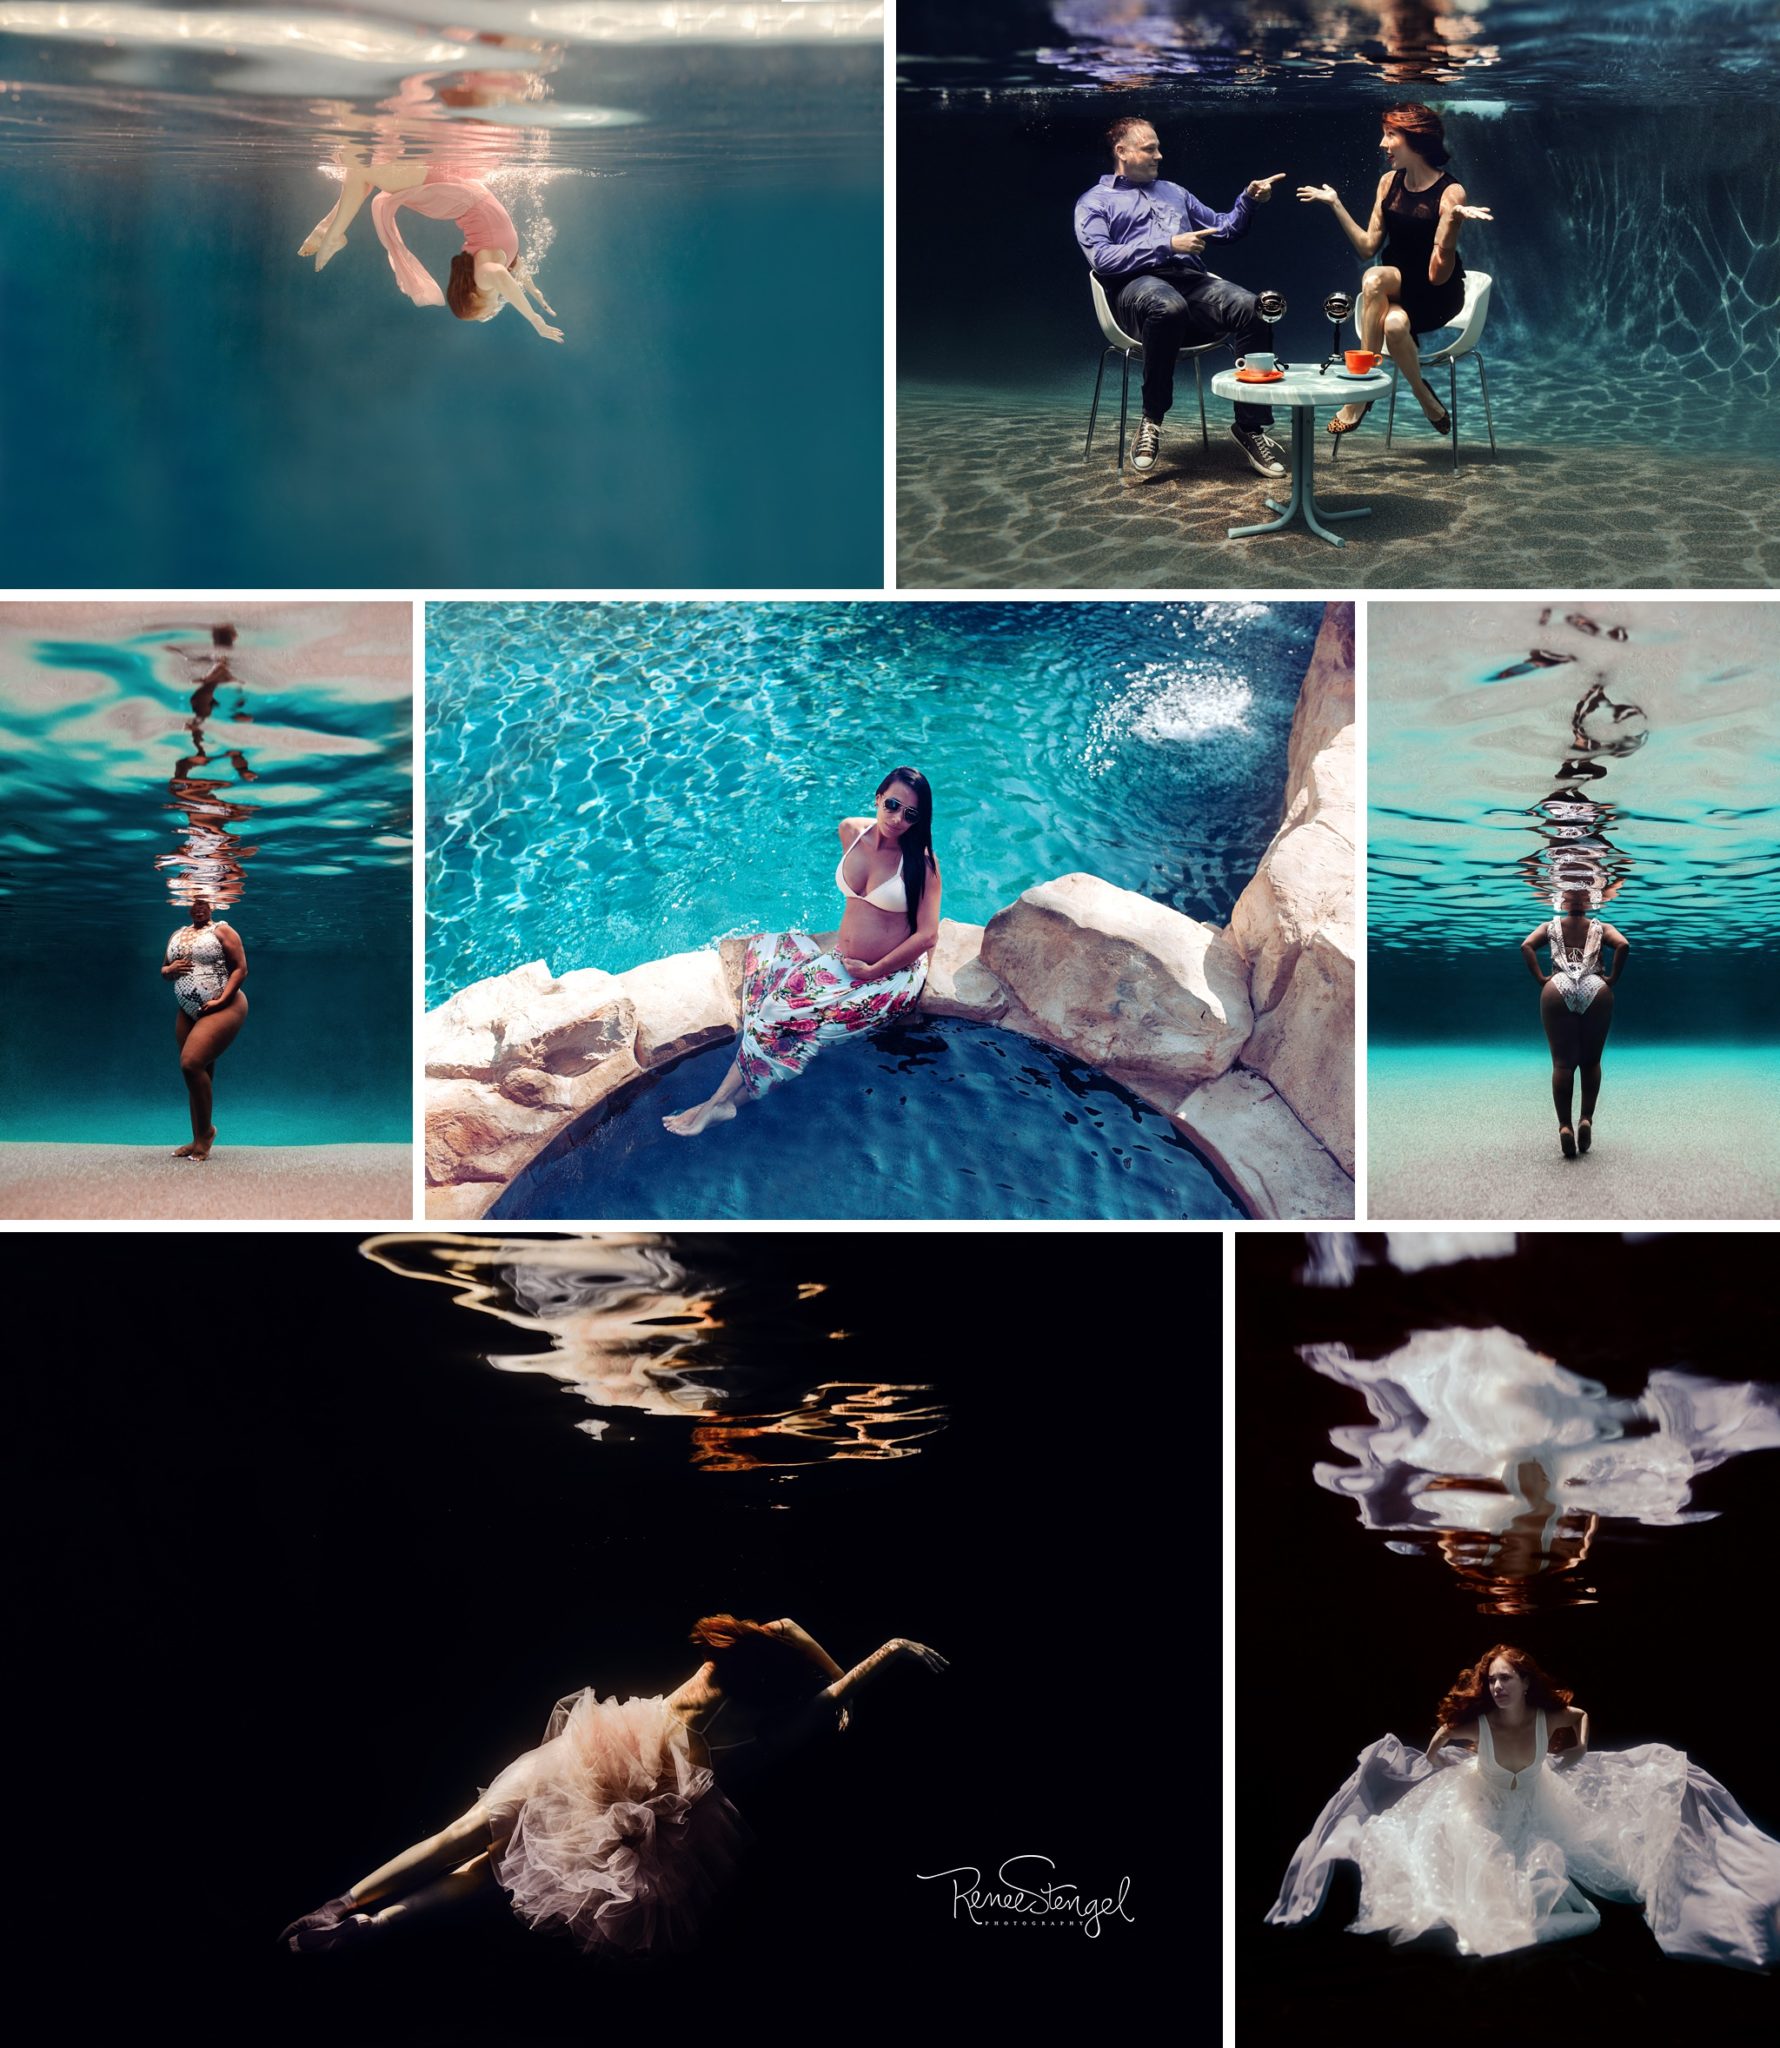 Examples of Client Outfits and Fashion in Underwater Maternity and Underwater Creative Portrait Sessions